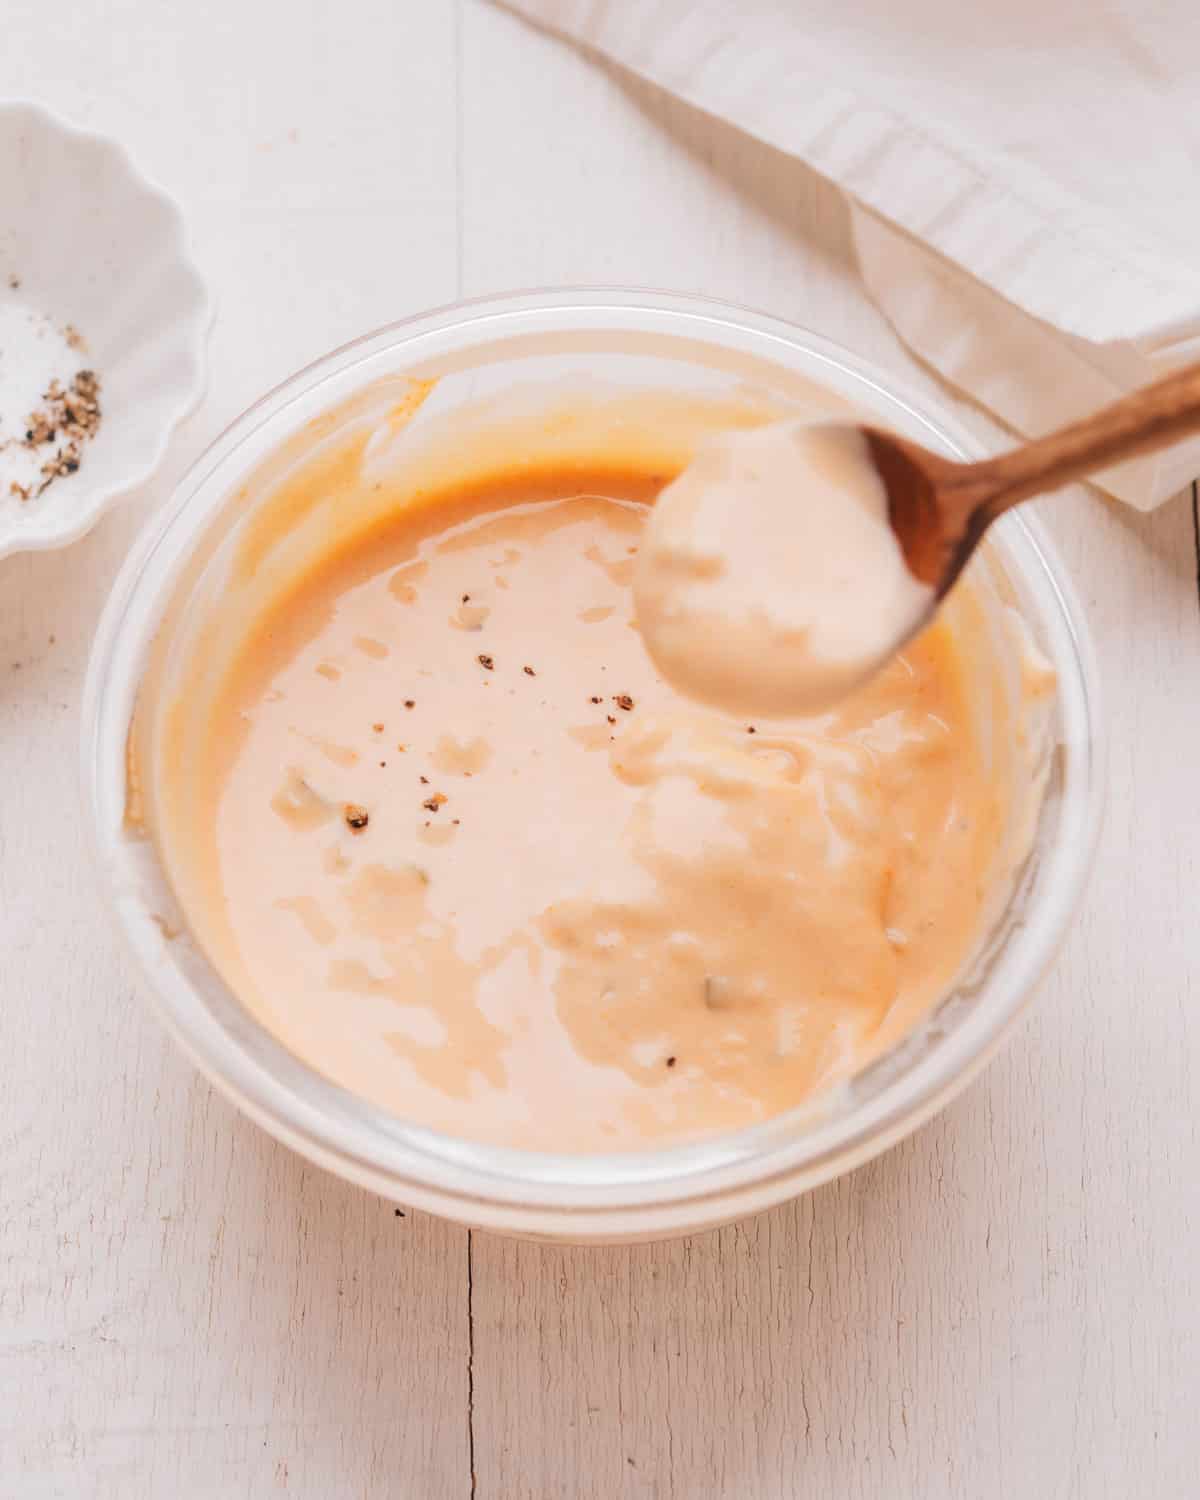 Big Mac Sauce in a glass dish with a spoon.
